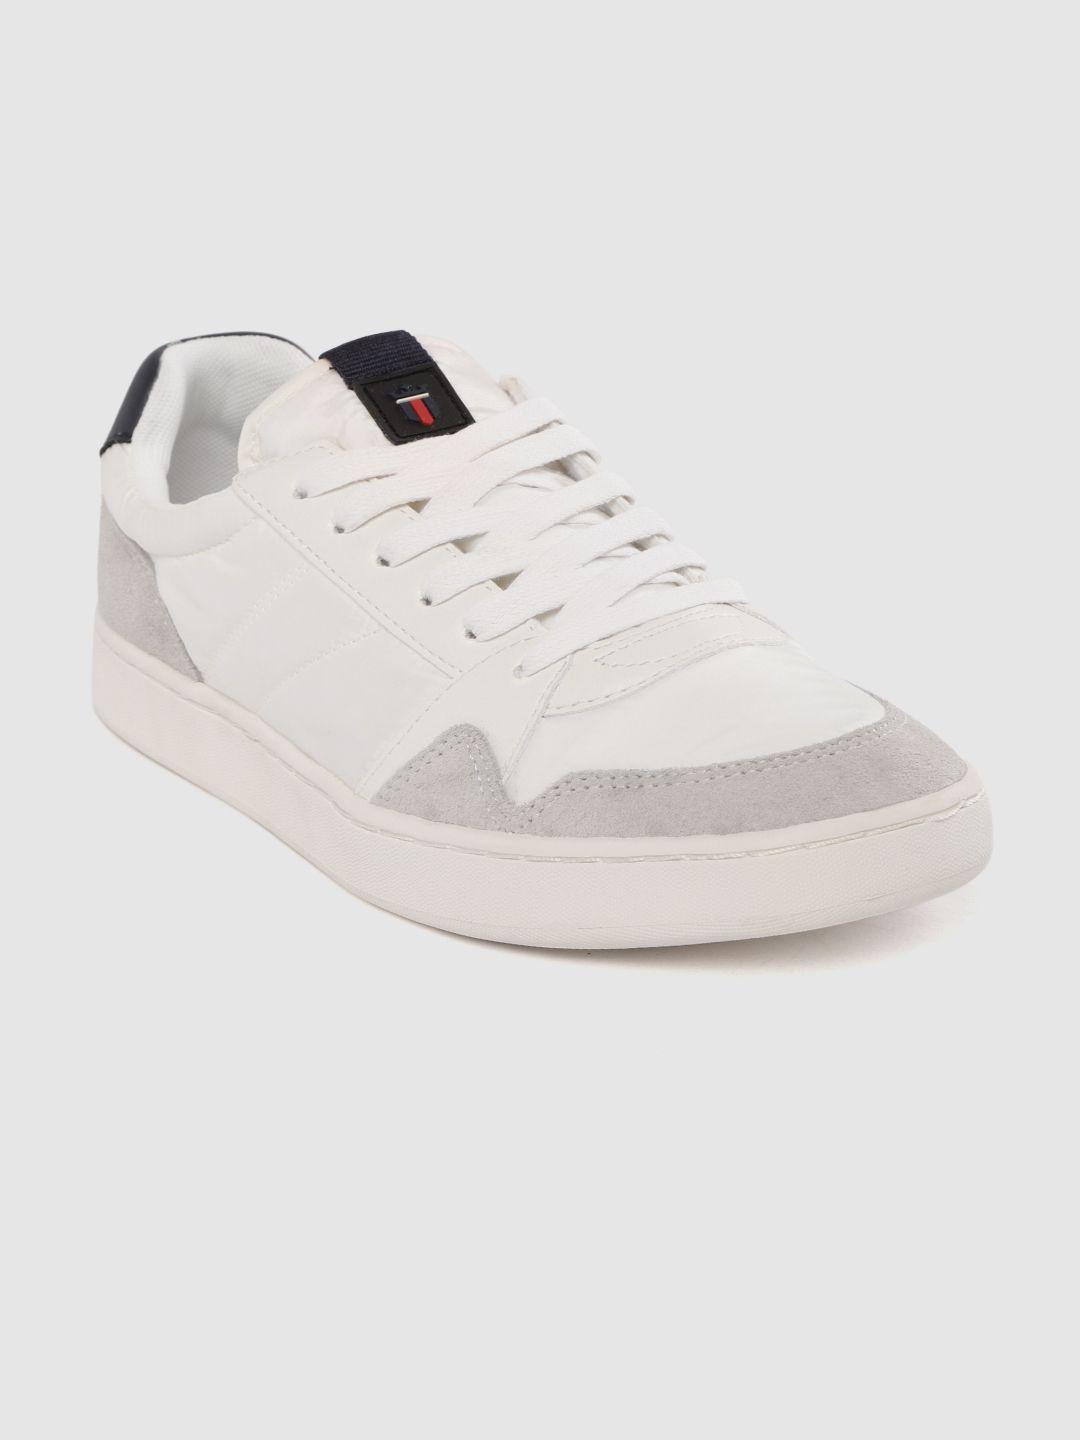 louis philippe sport men white solid sneakers